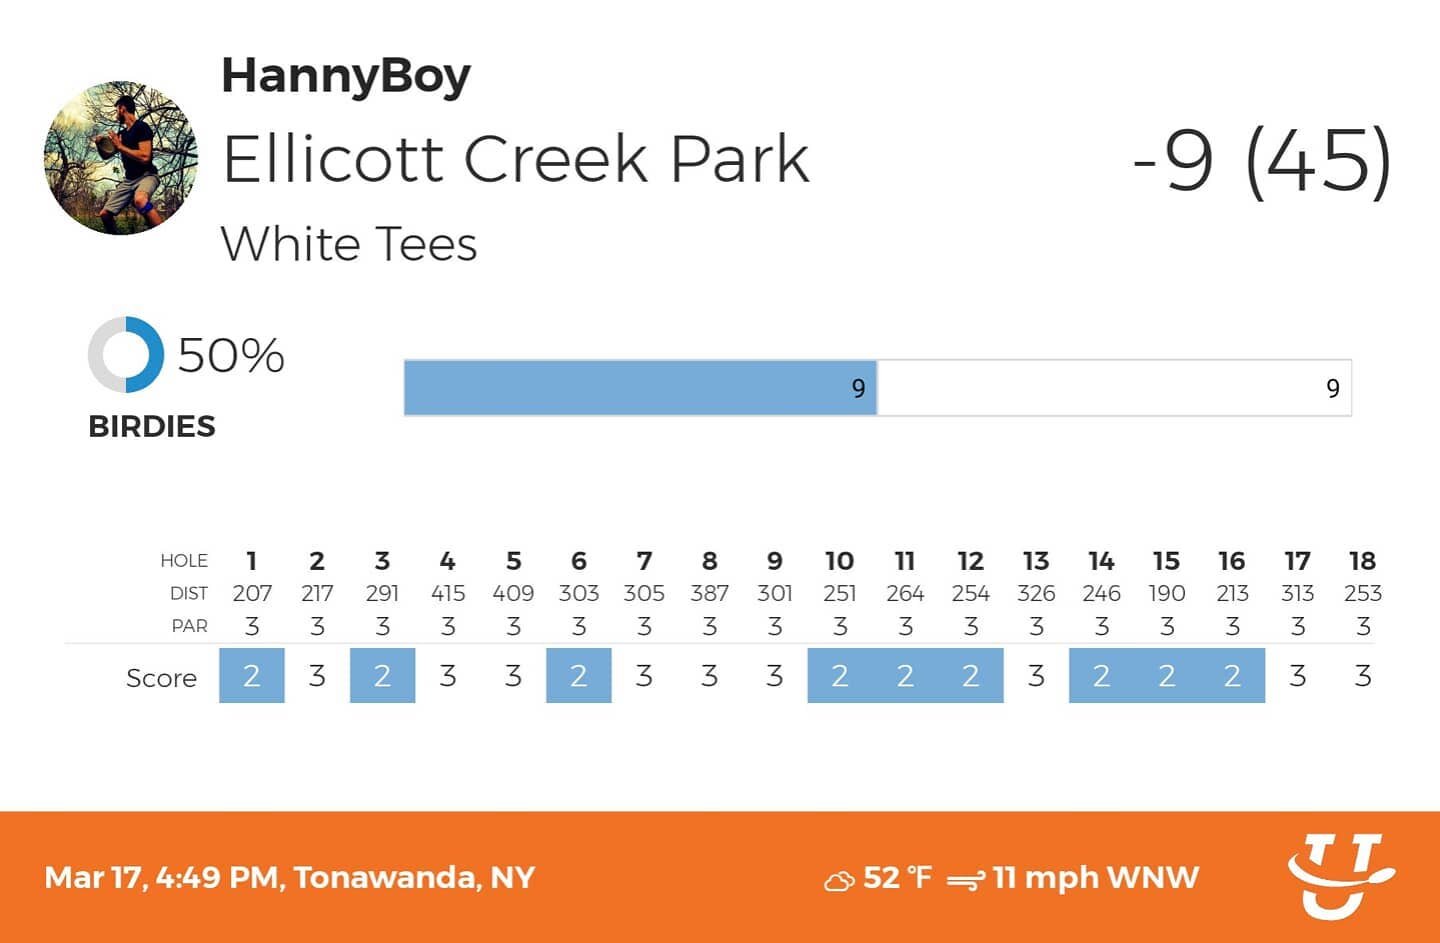 I guess the field work is paying off because I just shot a stress free personal best at Ellicott Creek that stood for 4 years! I just barely missed a 40 footer on 13 to make it 7 straight birdies on the back 9.

This is after just a few days of field